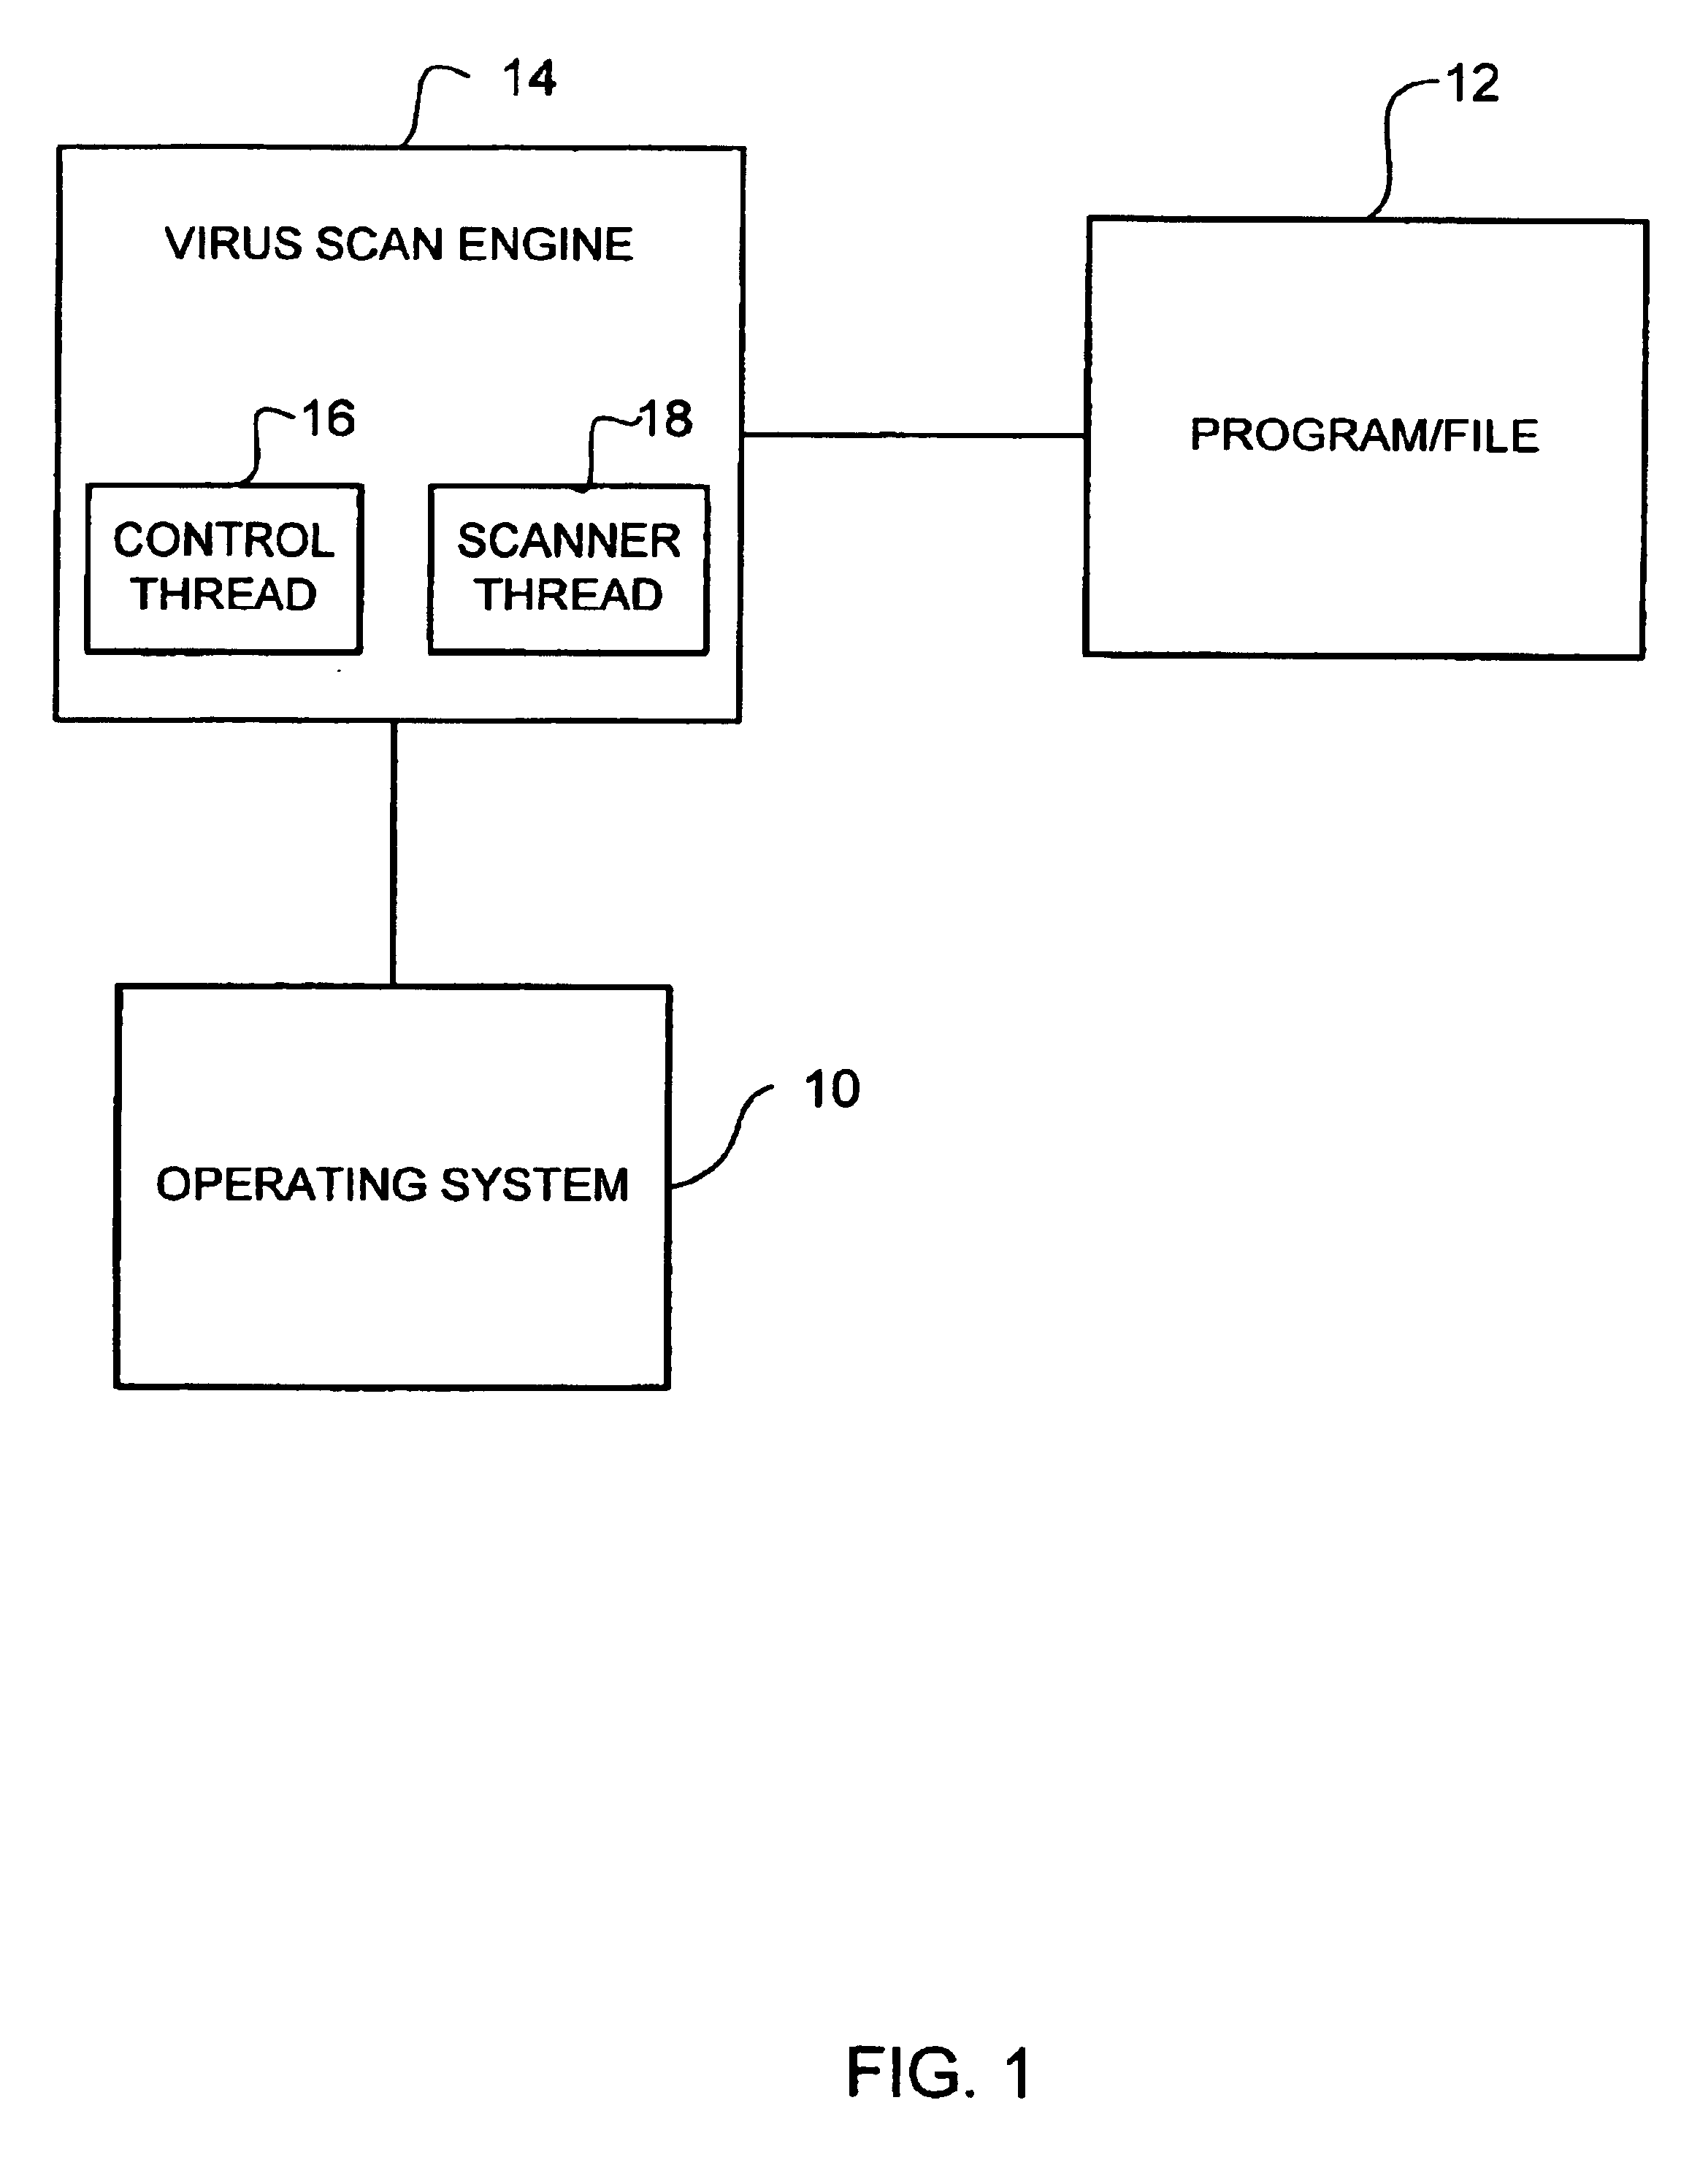 Method and system for limiting processor utilization by a virus scanner